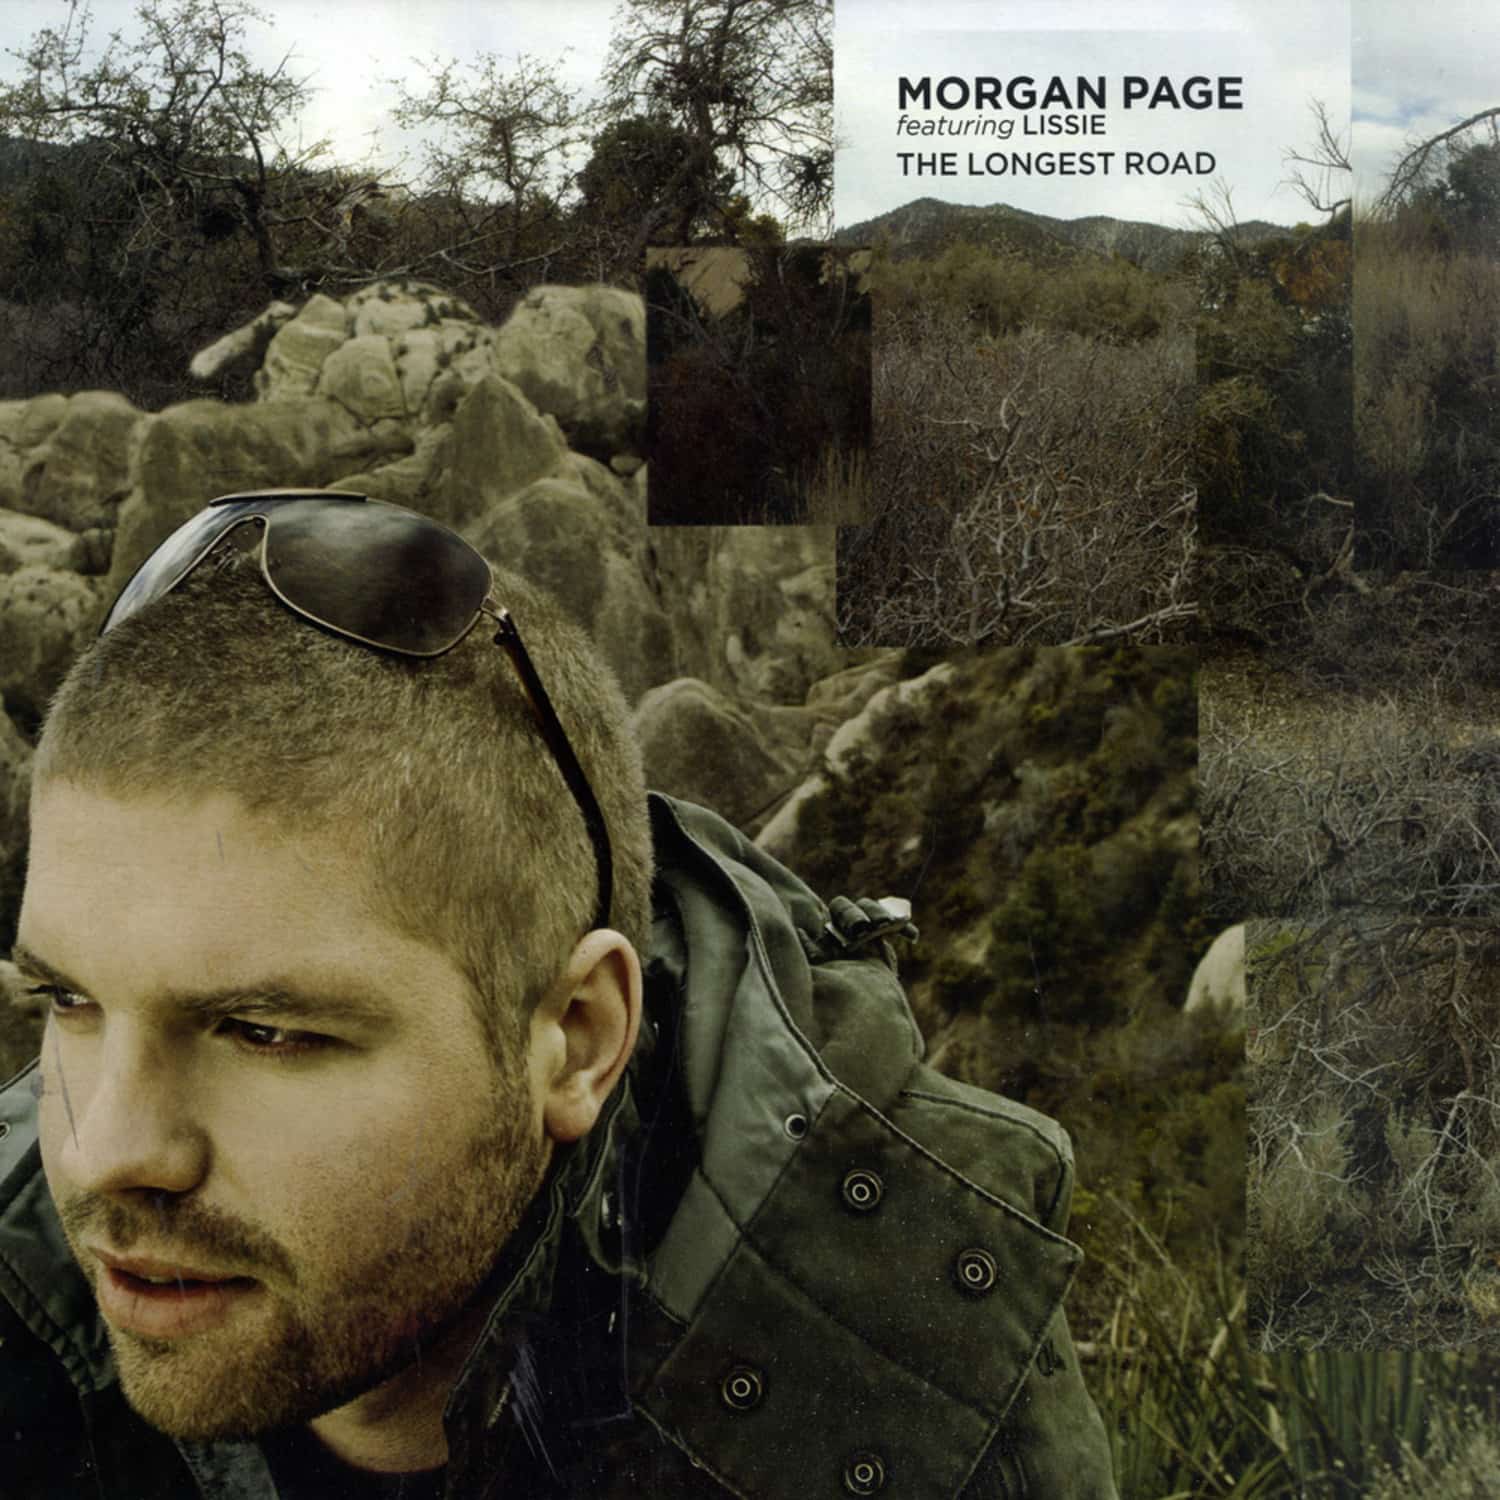 Morgan Page - THE LONGEST ROAD